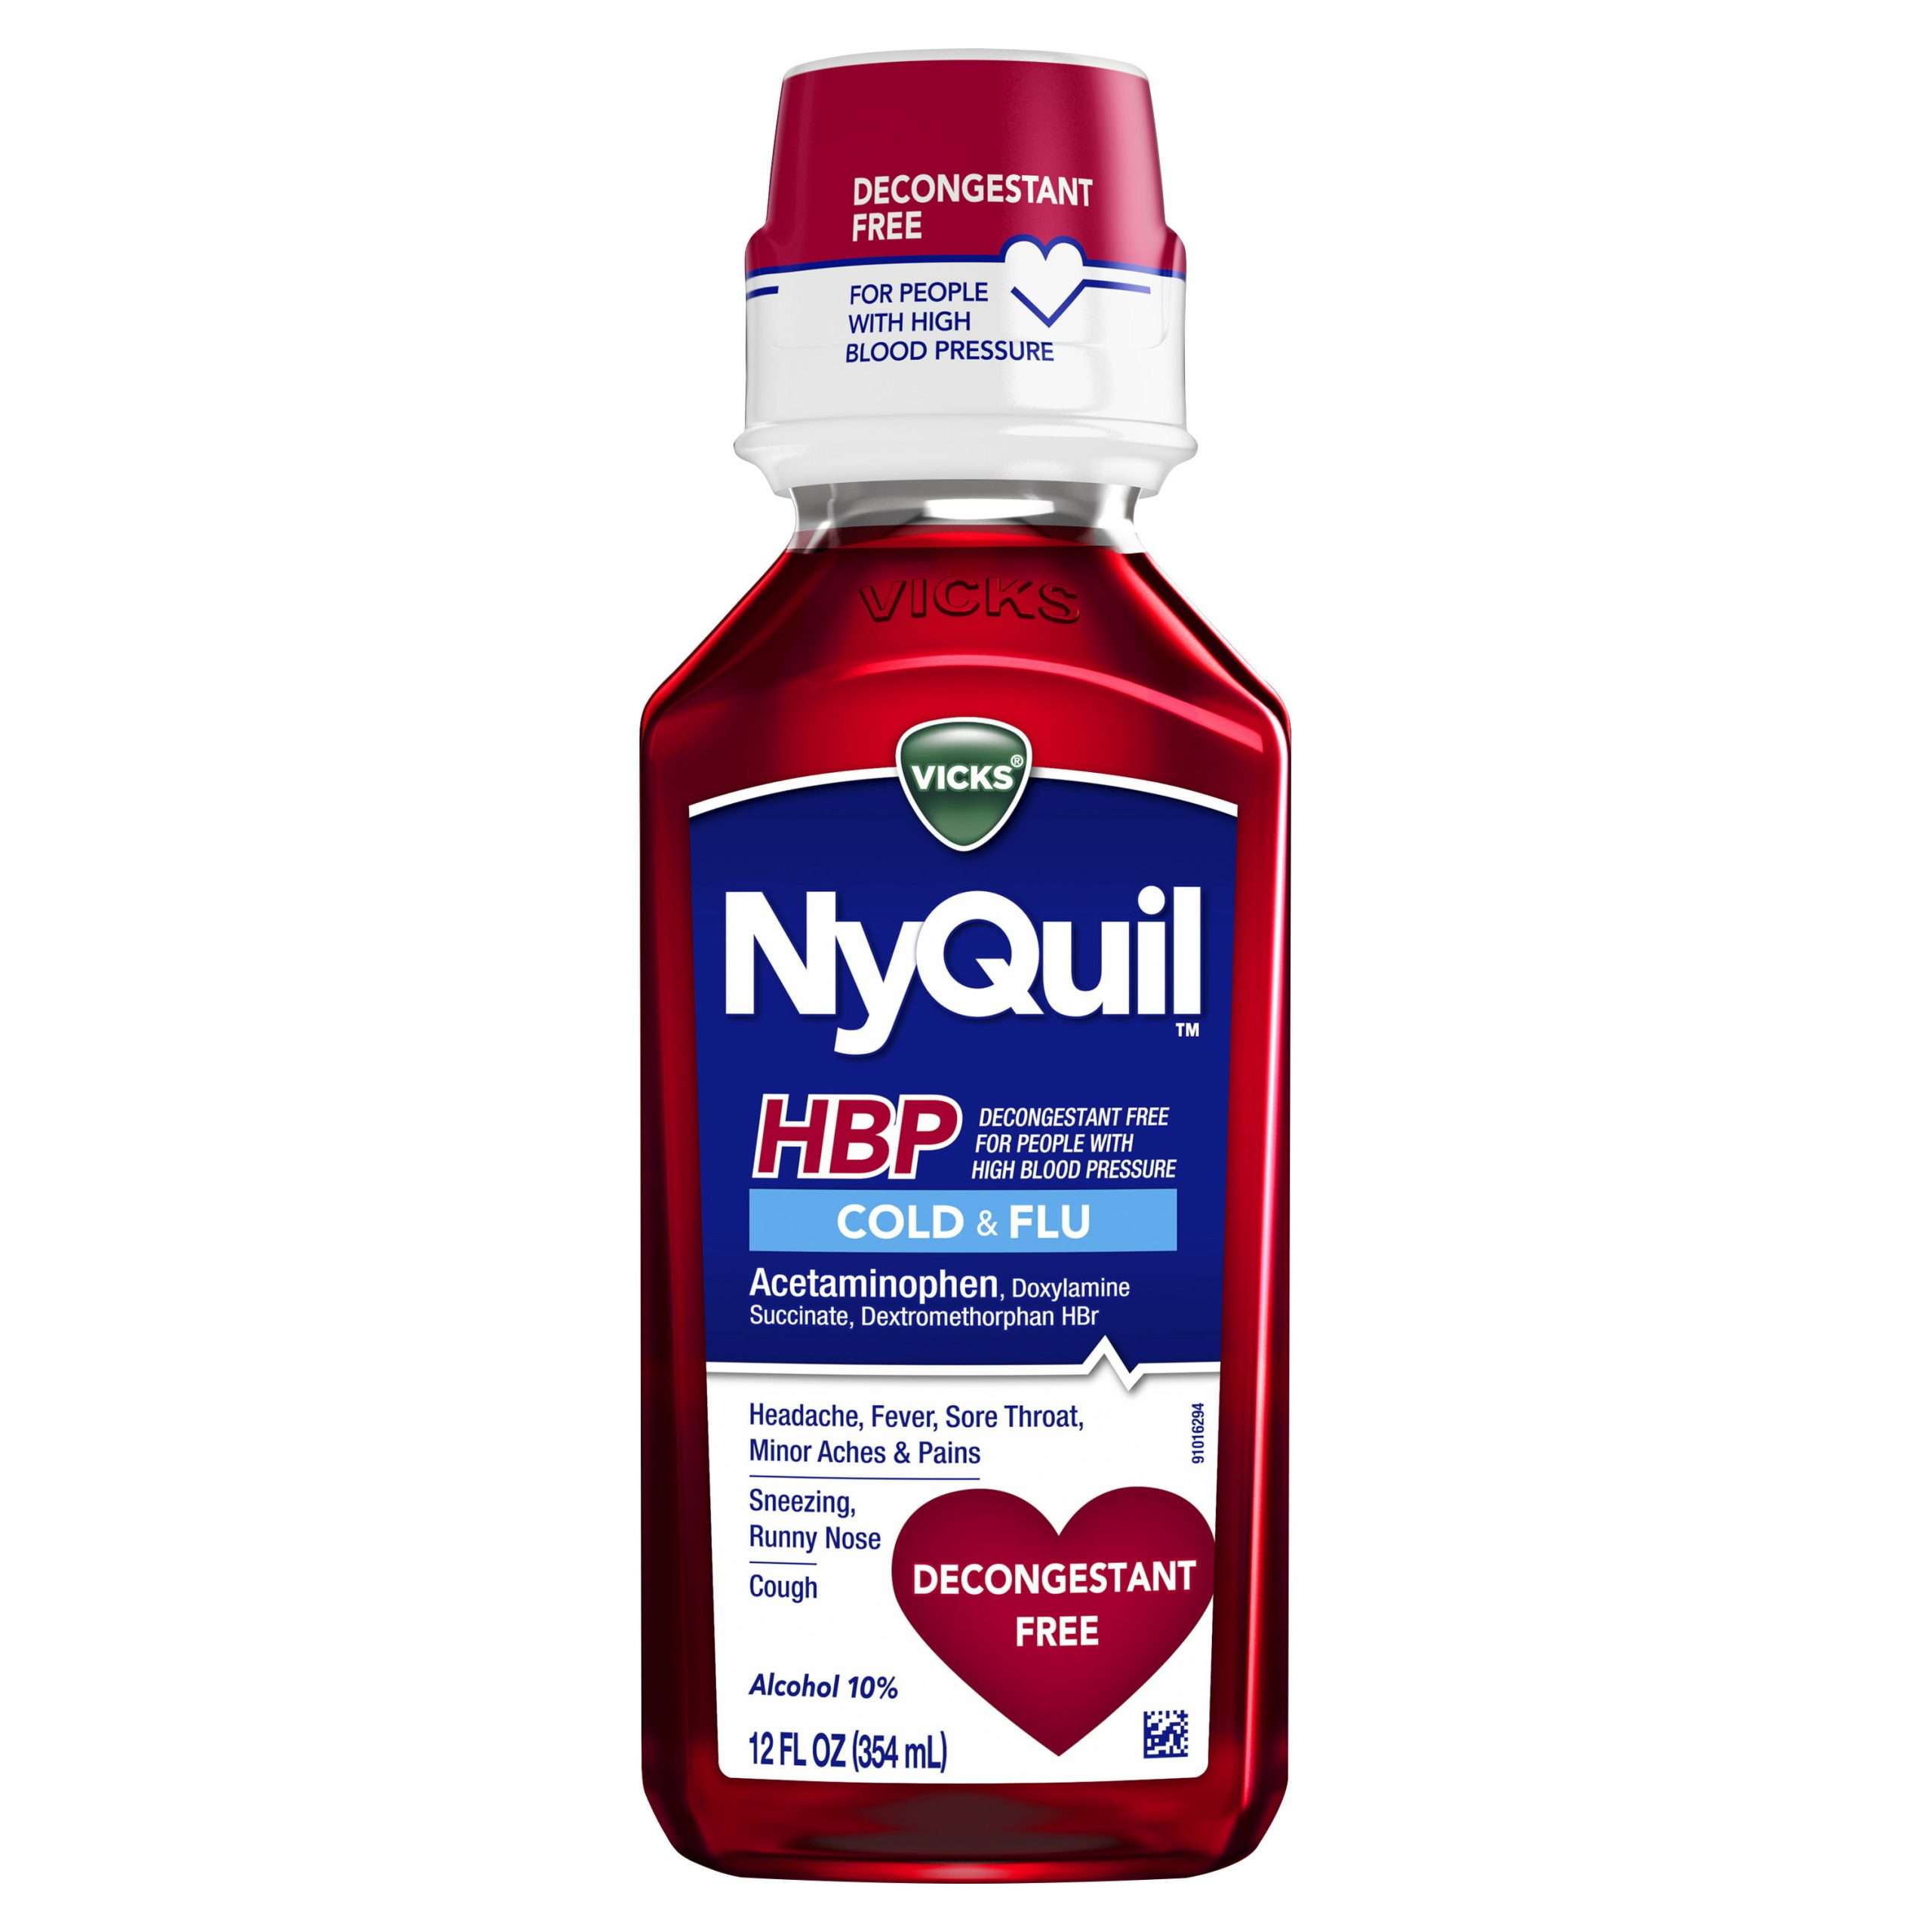 Vicks Nyquil High Blood Pressure Cold and Flu Medicine, Liquid 12 oz ...